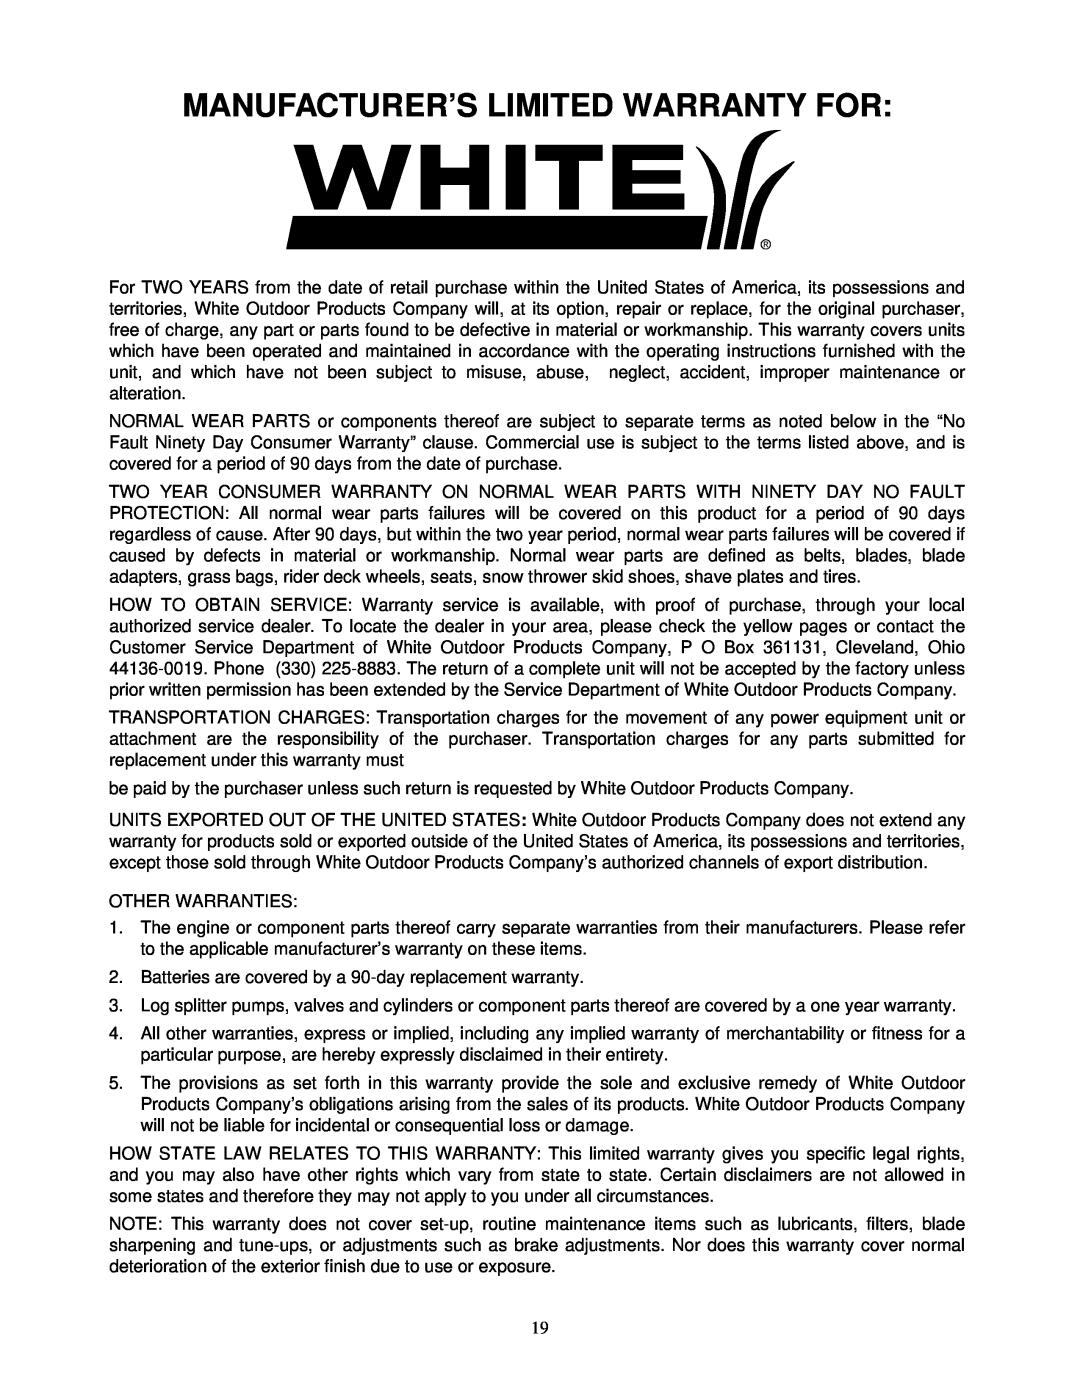 White LC-436 manual Manufacturer’S Limited Warranty For 